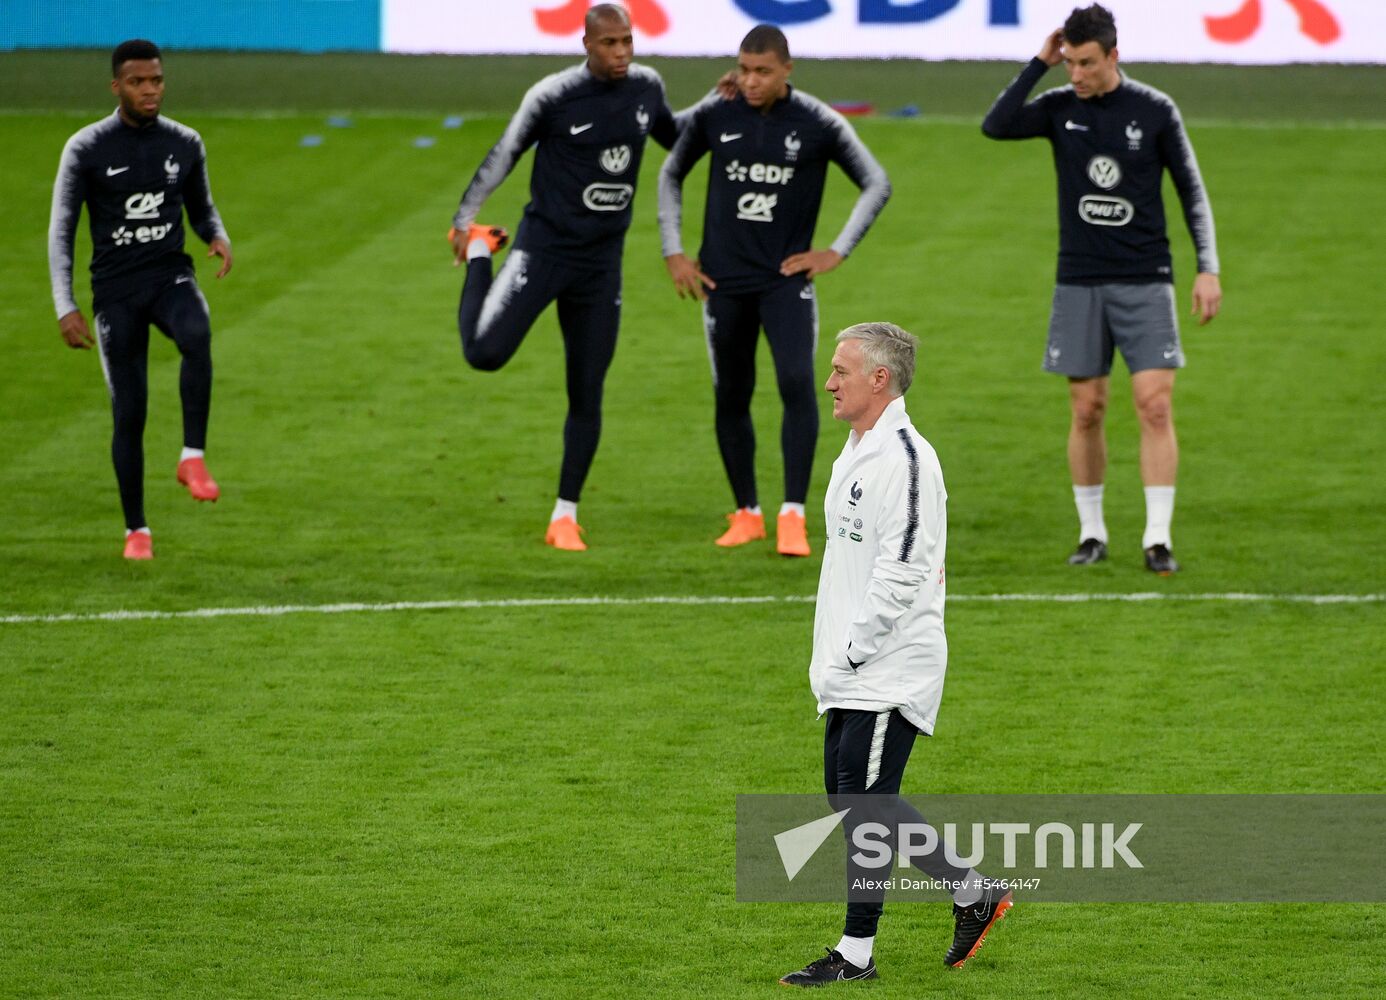 Football. French national team holds training session